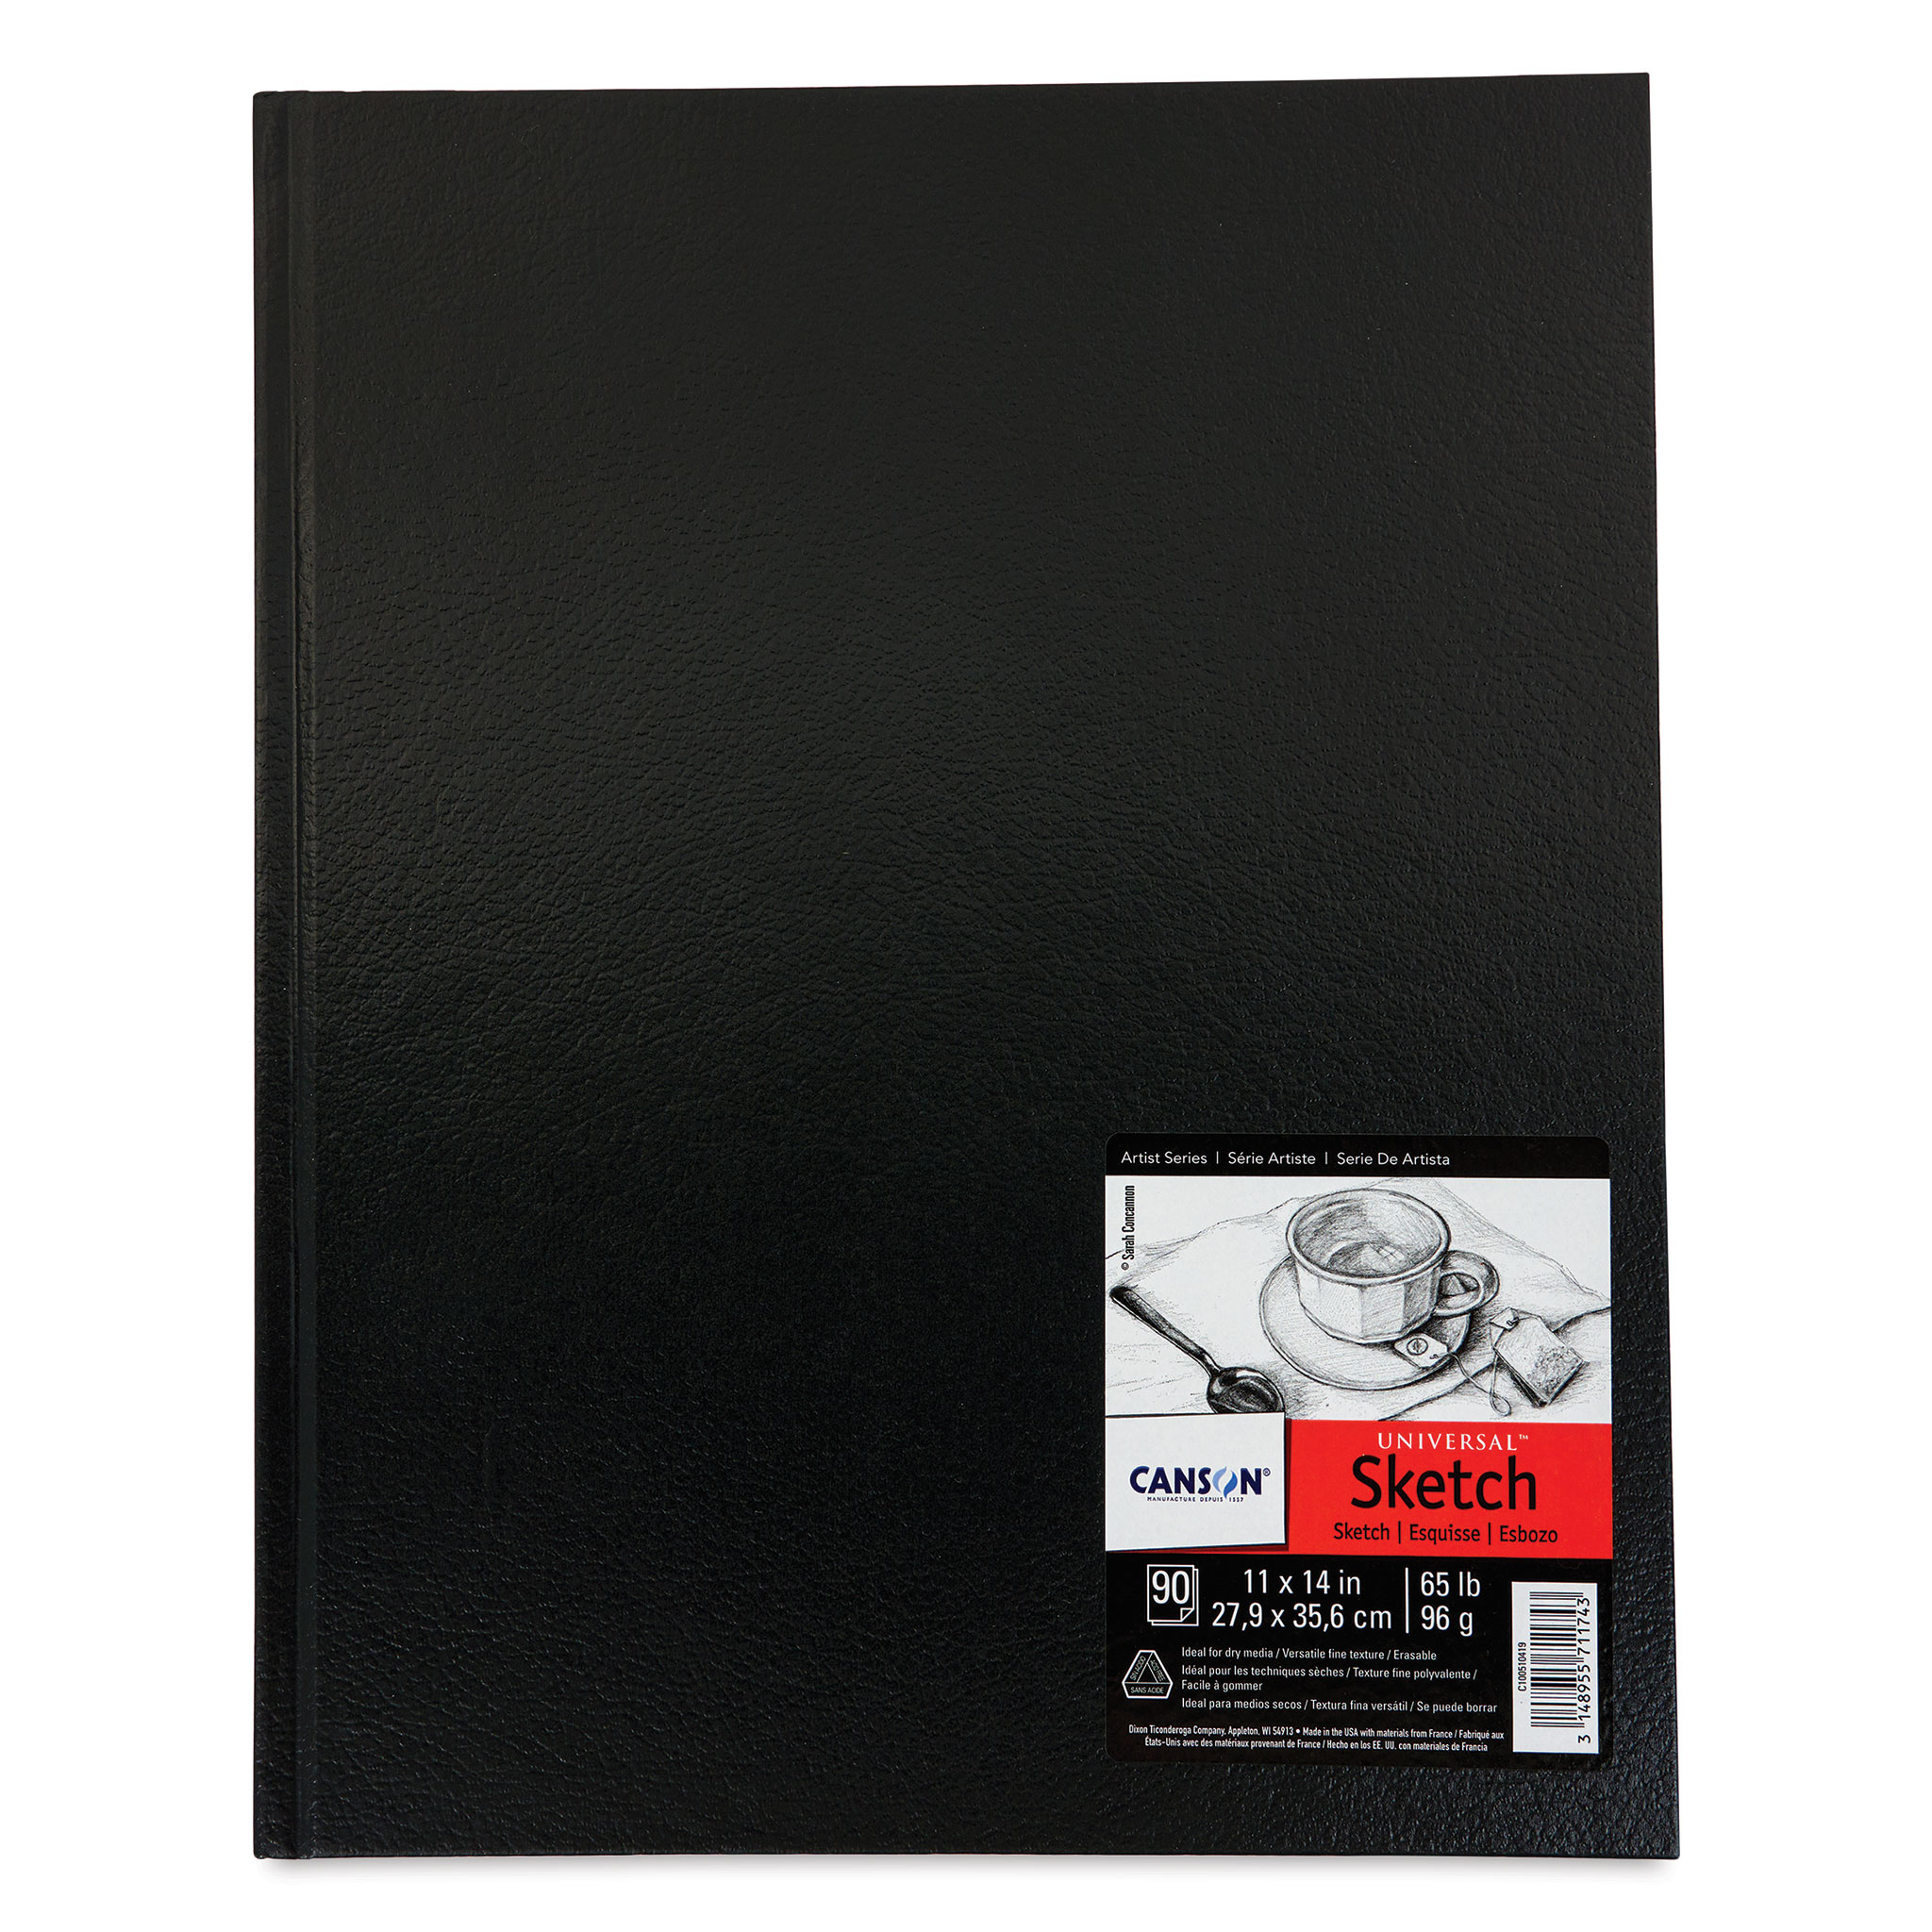 Canson Basic Hardcover Sketchbook, 8-1/2 x 11 Inches, 65 lb, 108 Sheets